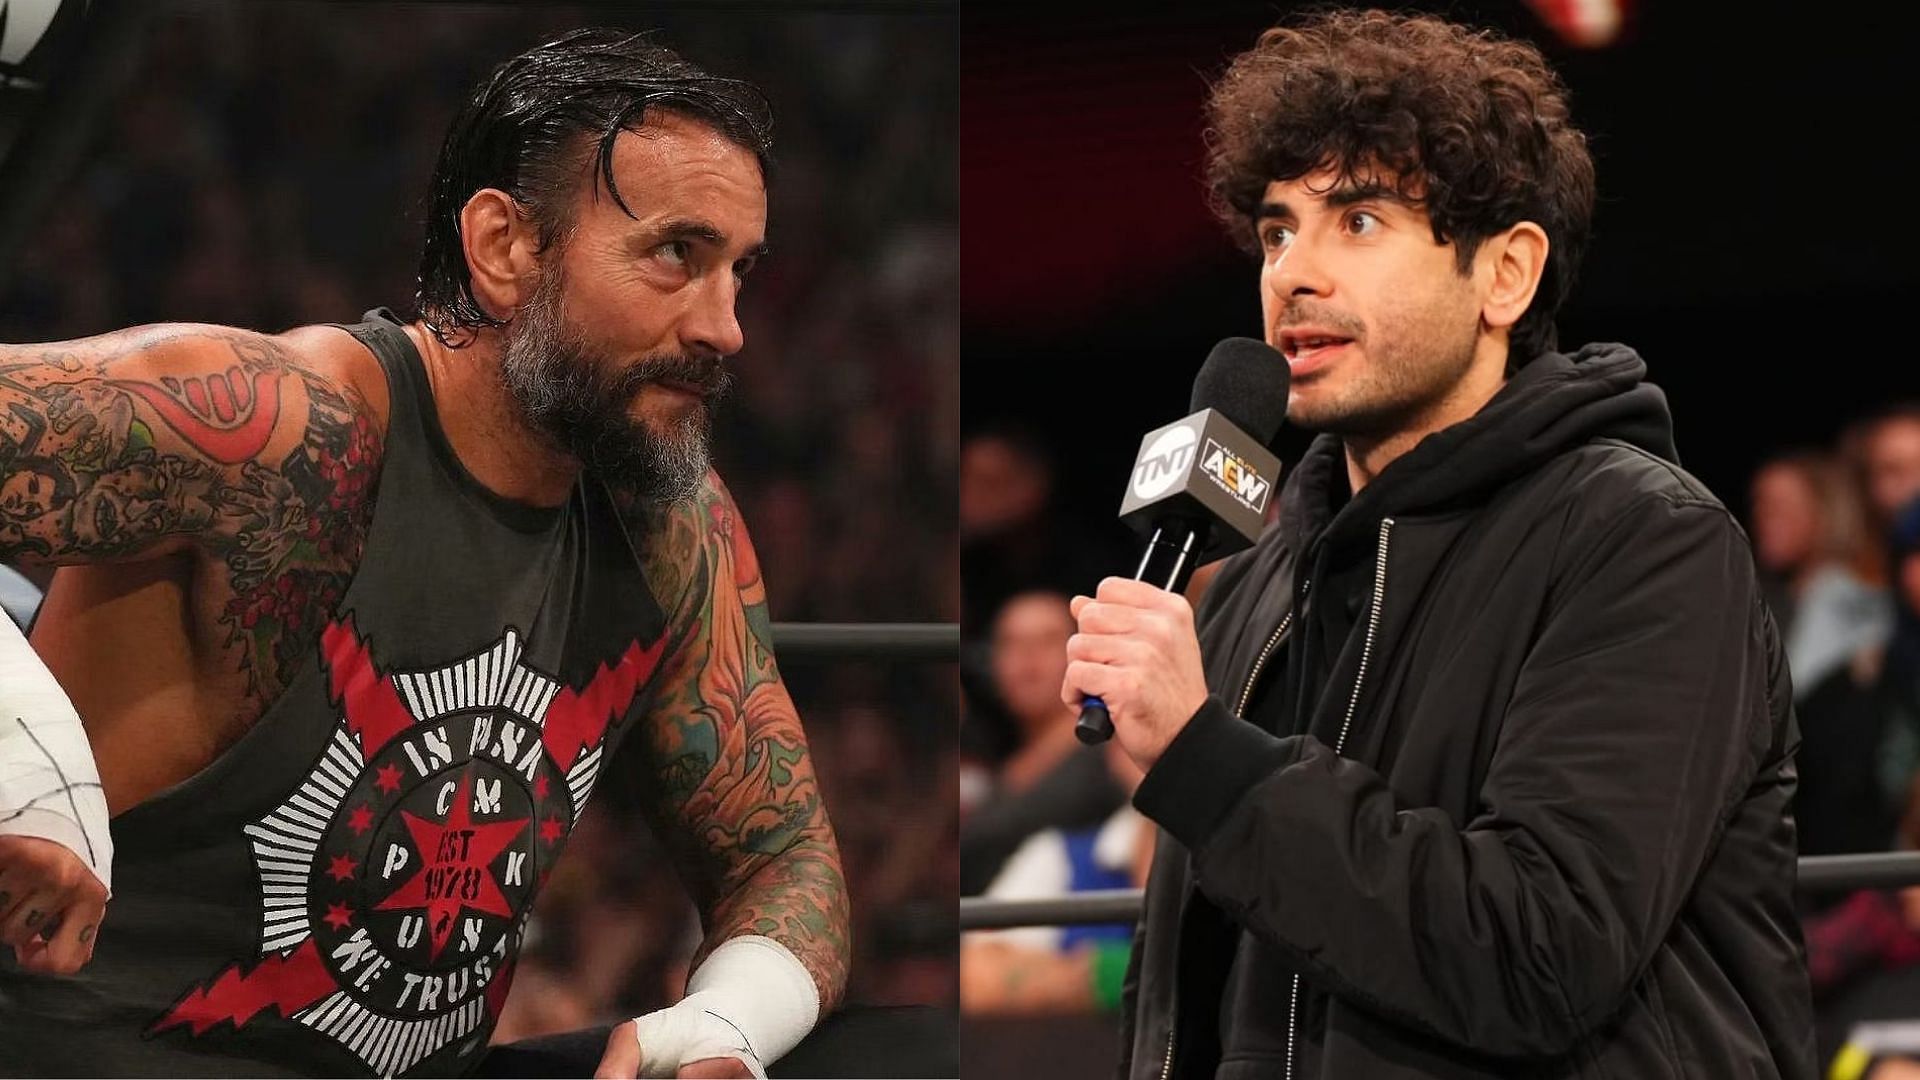 Did CM Punk almost put his hands on Tony Khan?